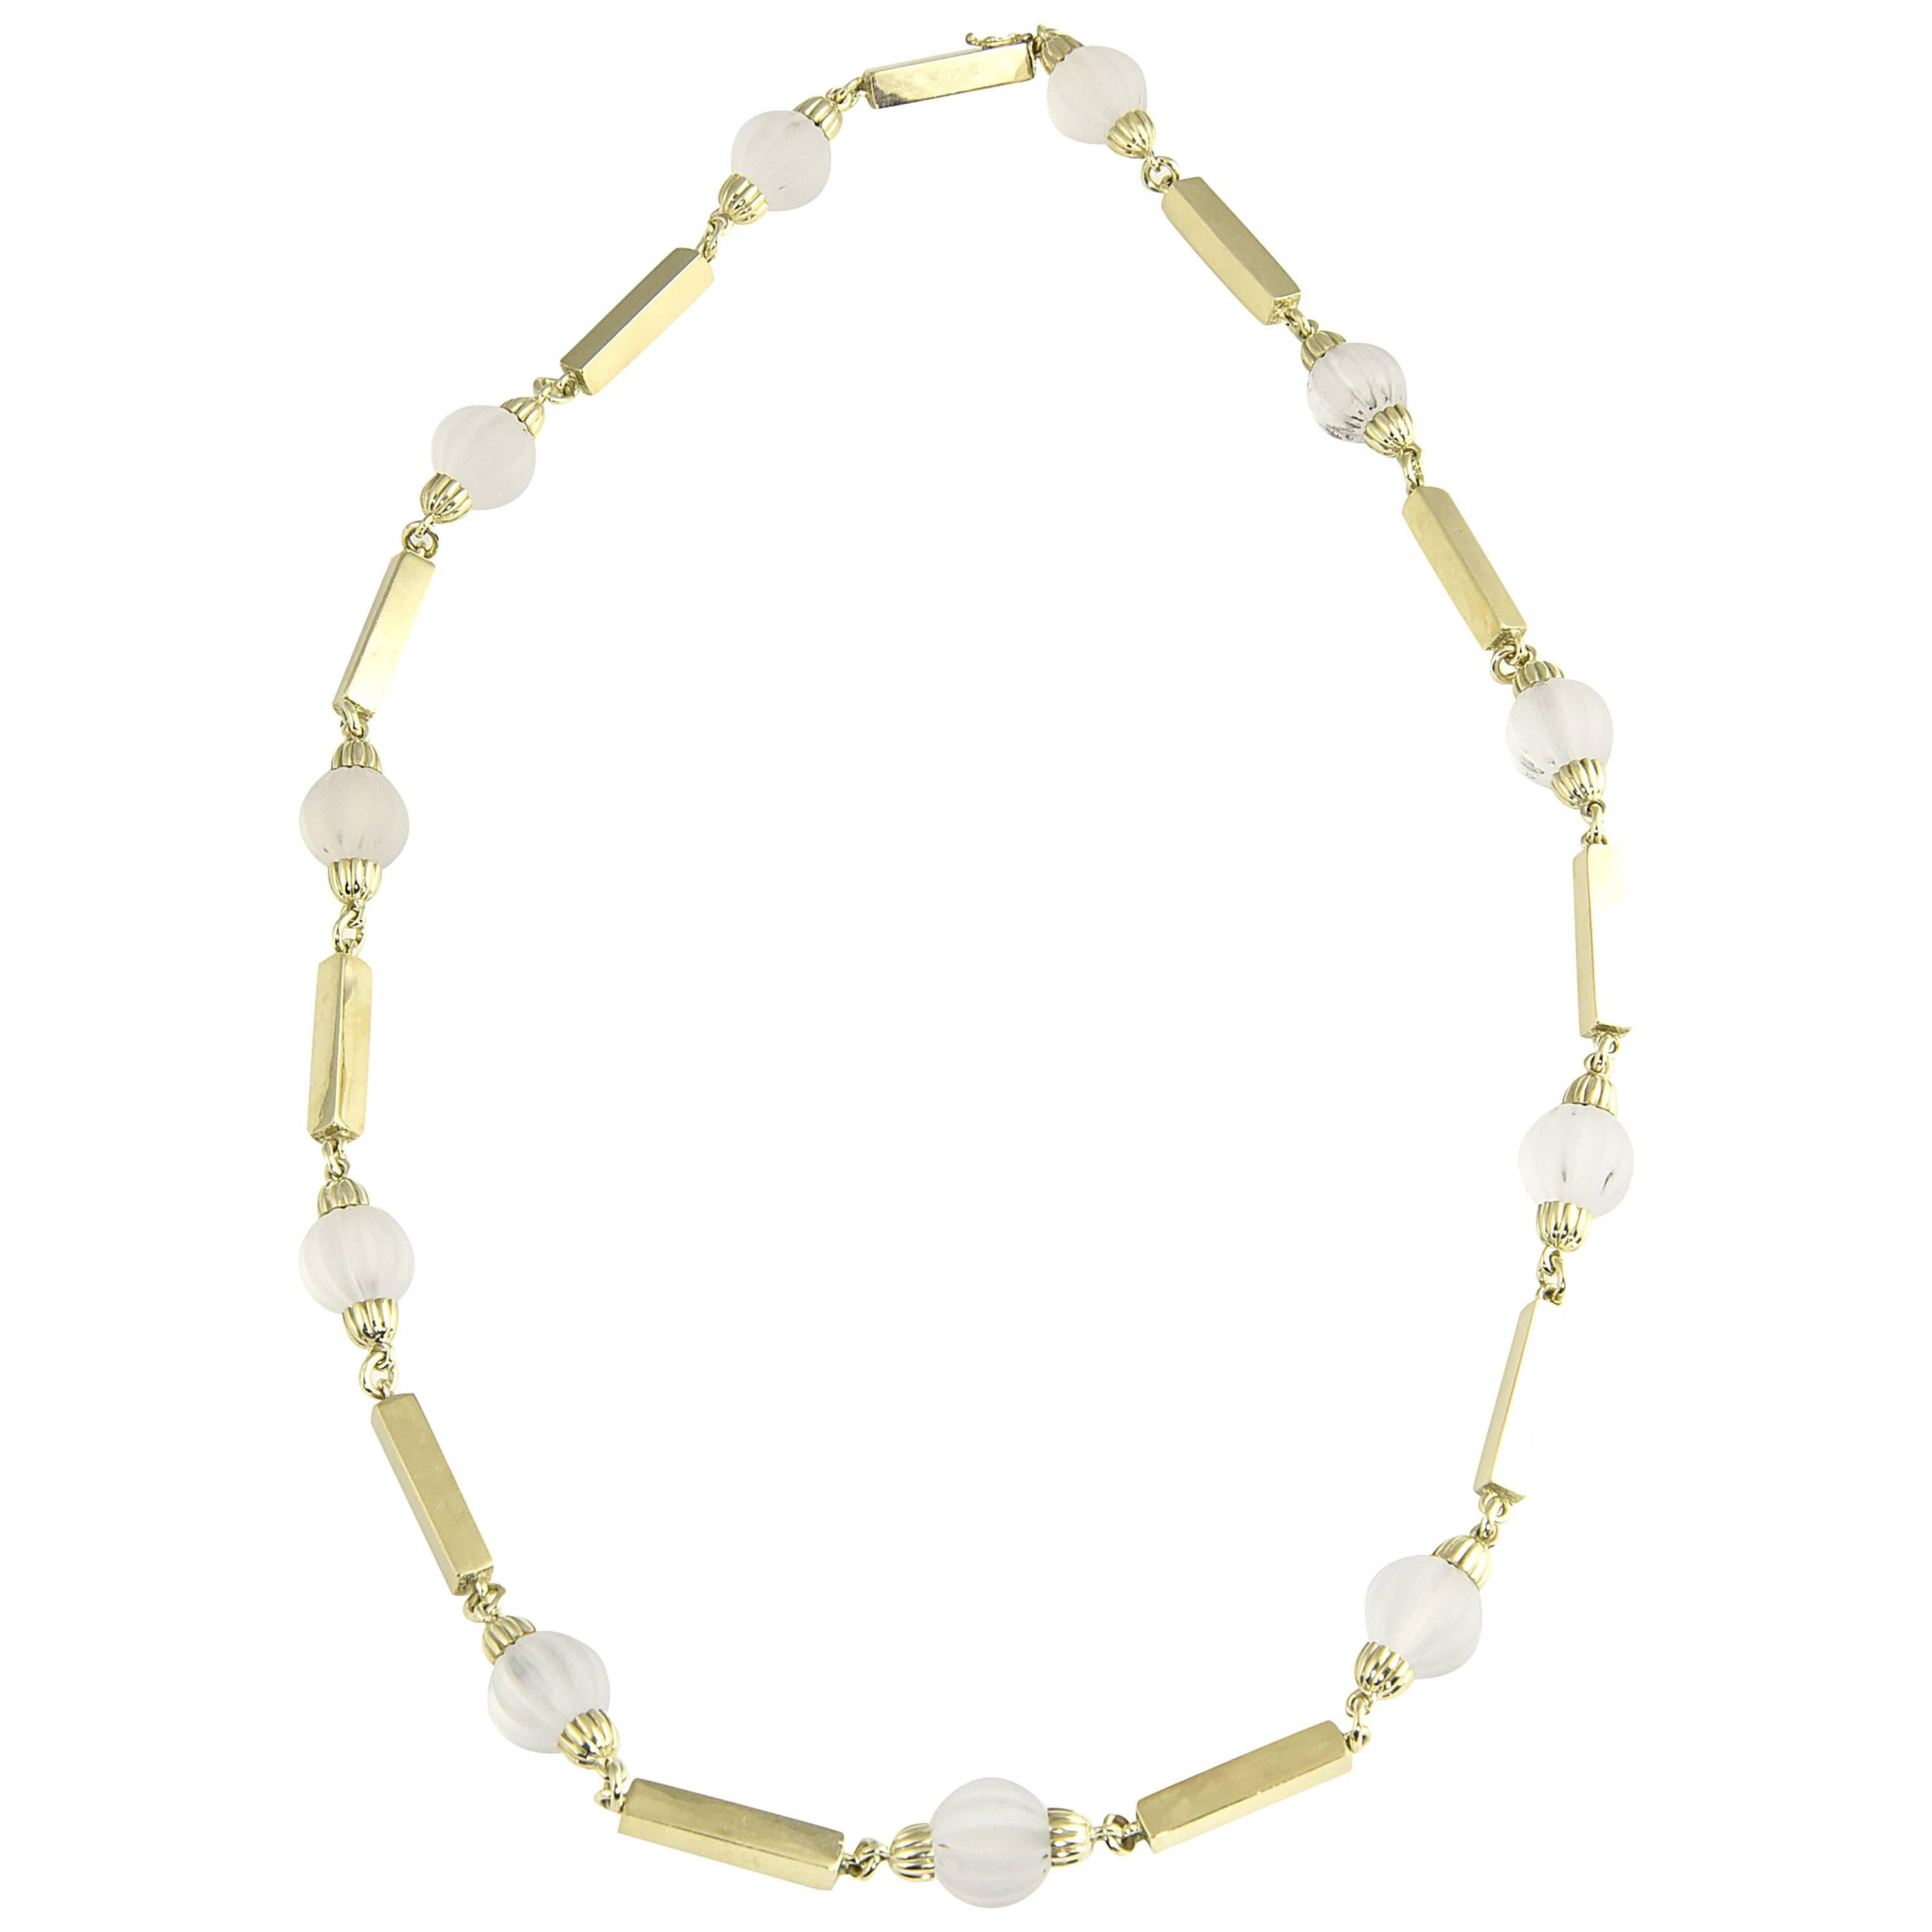 1970s La Triomphe Rock Crystal Fluted Beads and Gold Bar Necklace